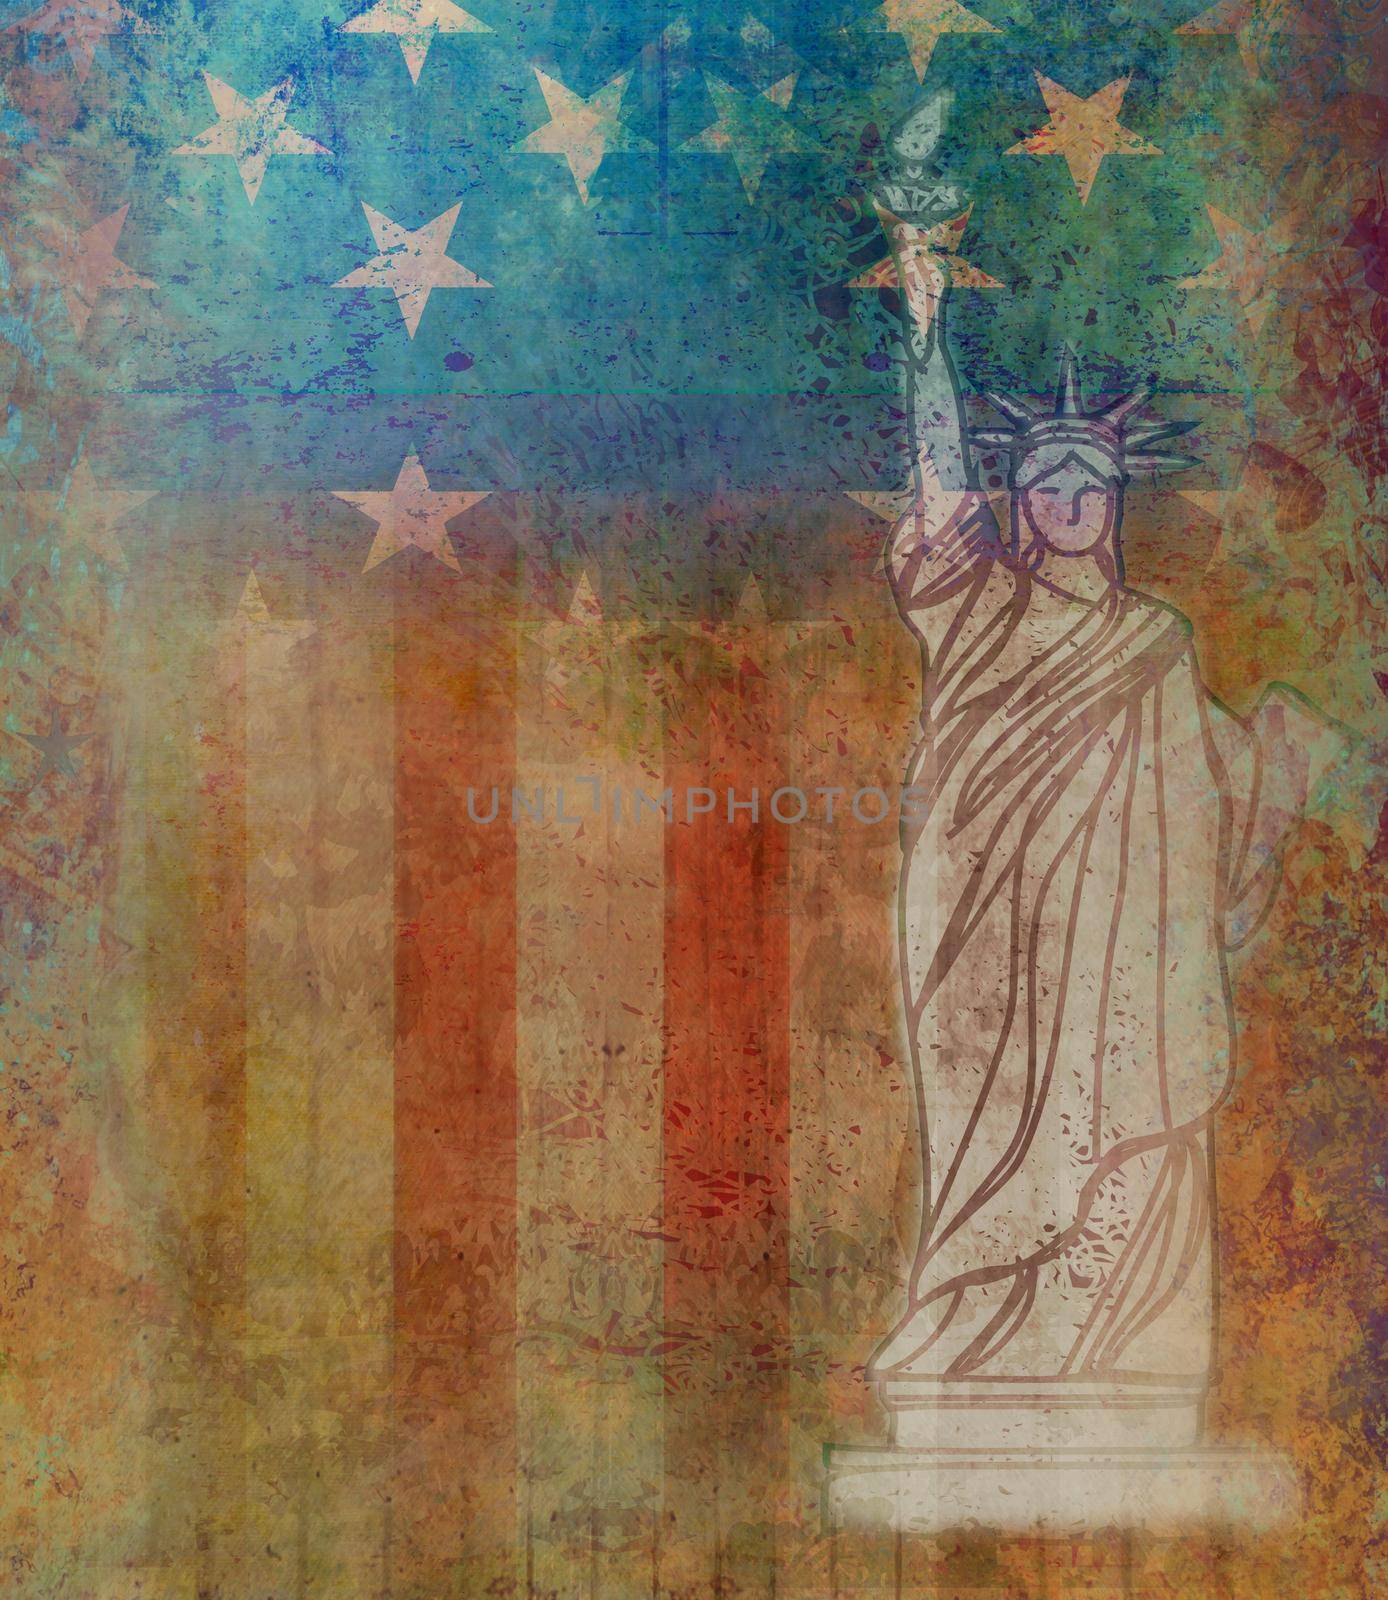 Grunge illustration of the american flag with the Statue of Liberty by JackyBrown